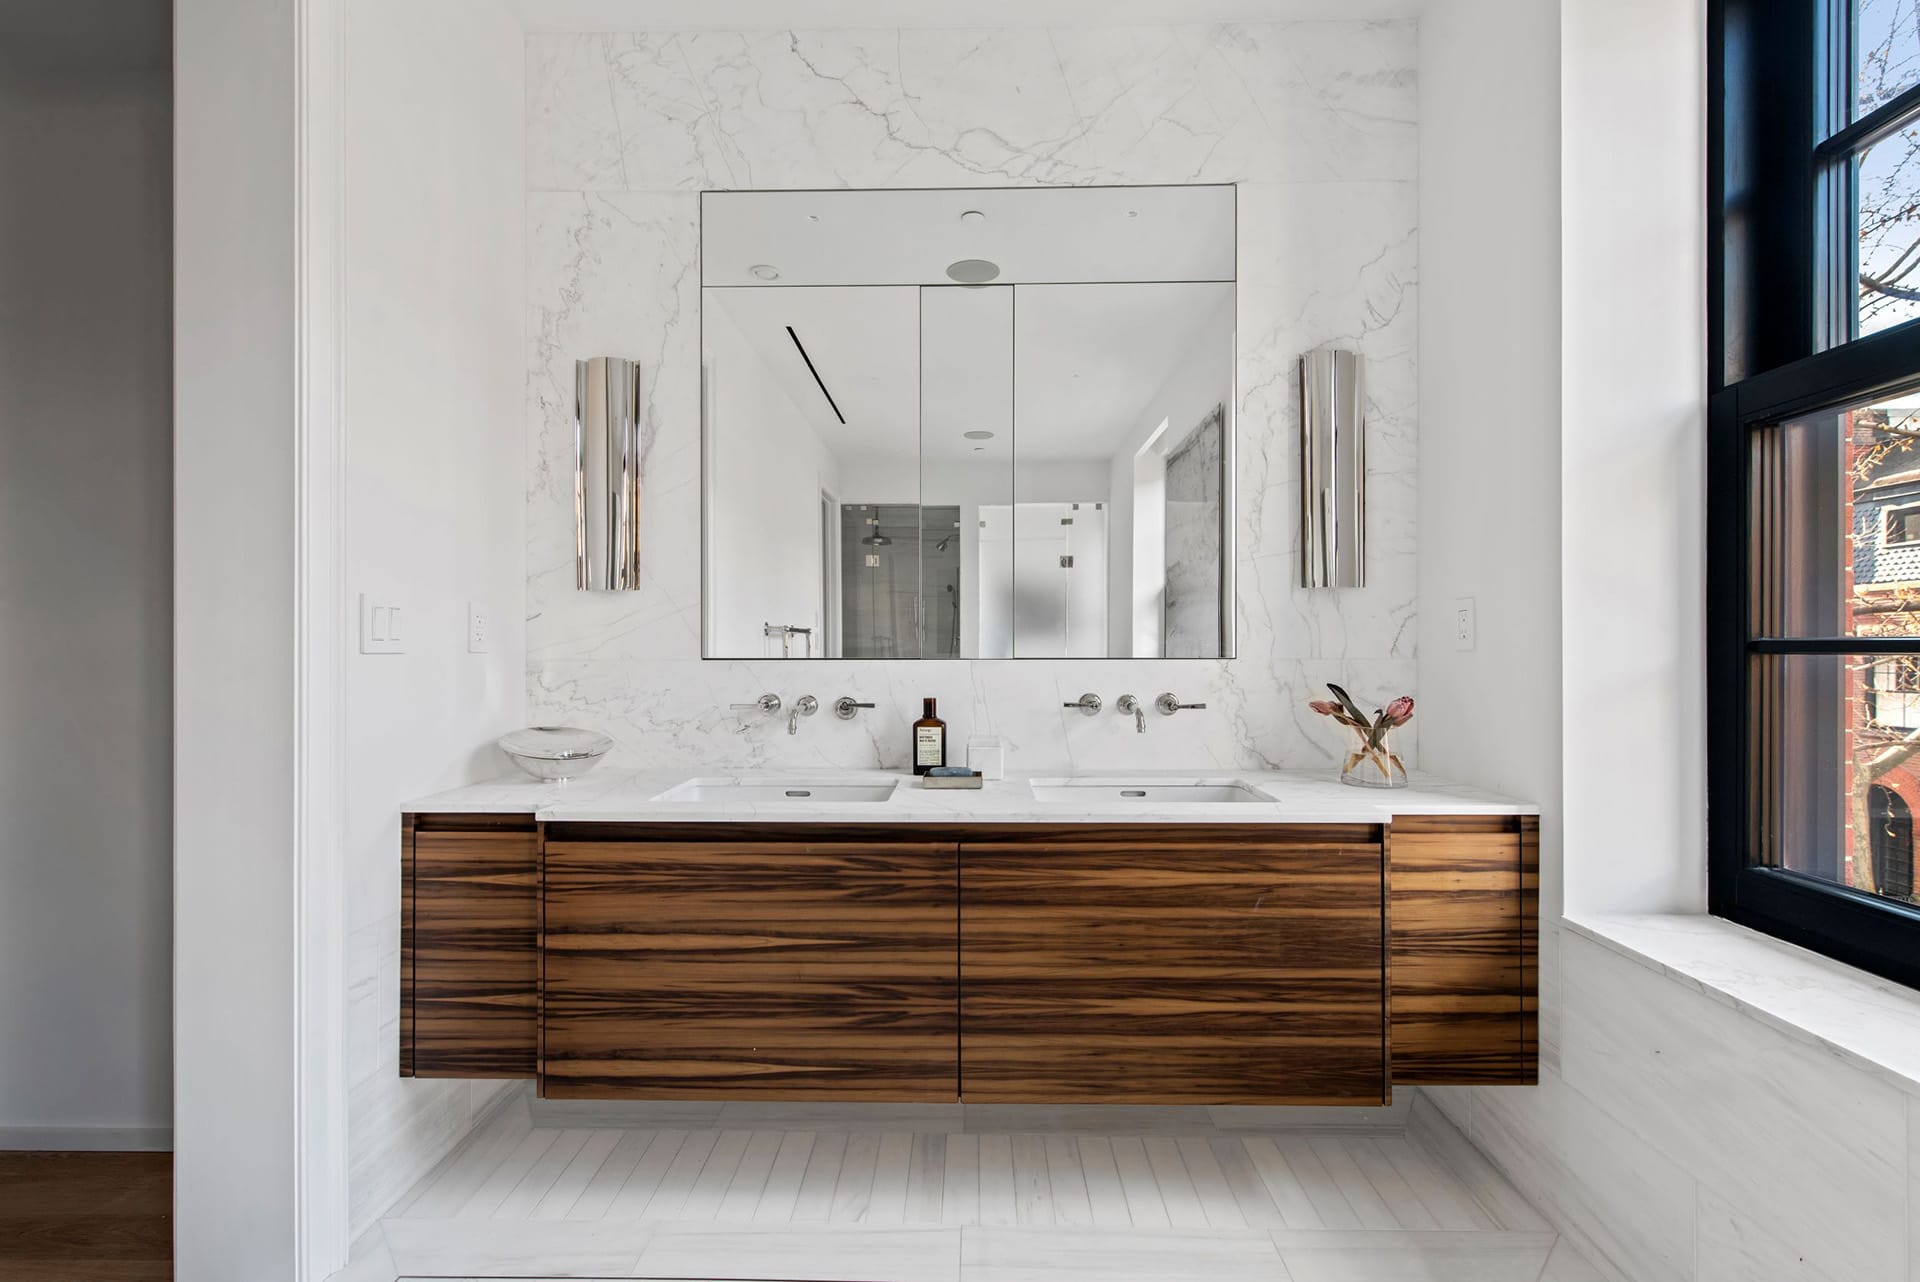 Floating wood vanity with Jack and Jill sinks, white marble countertops, and white stone tiles on the walls and floors.